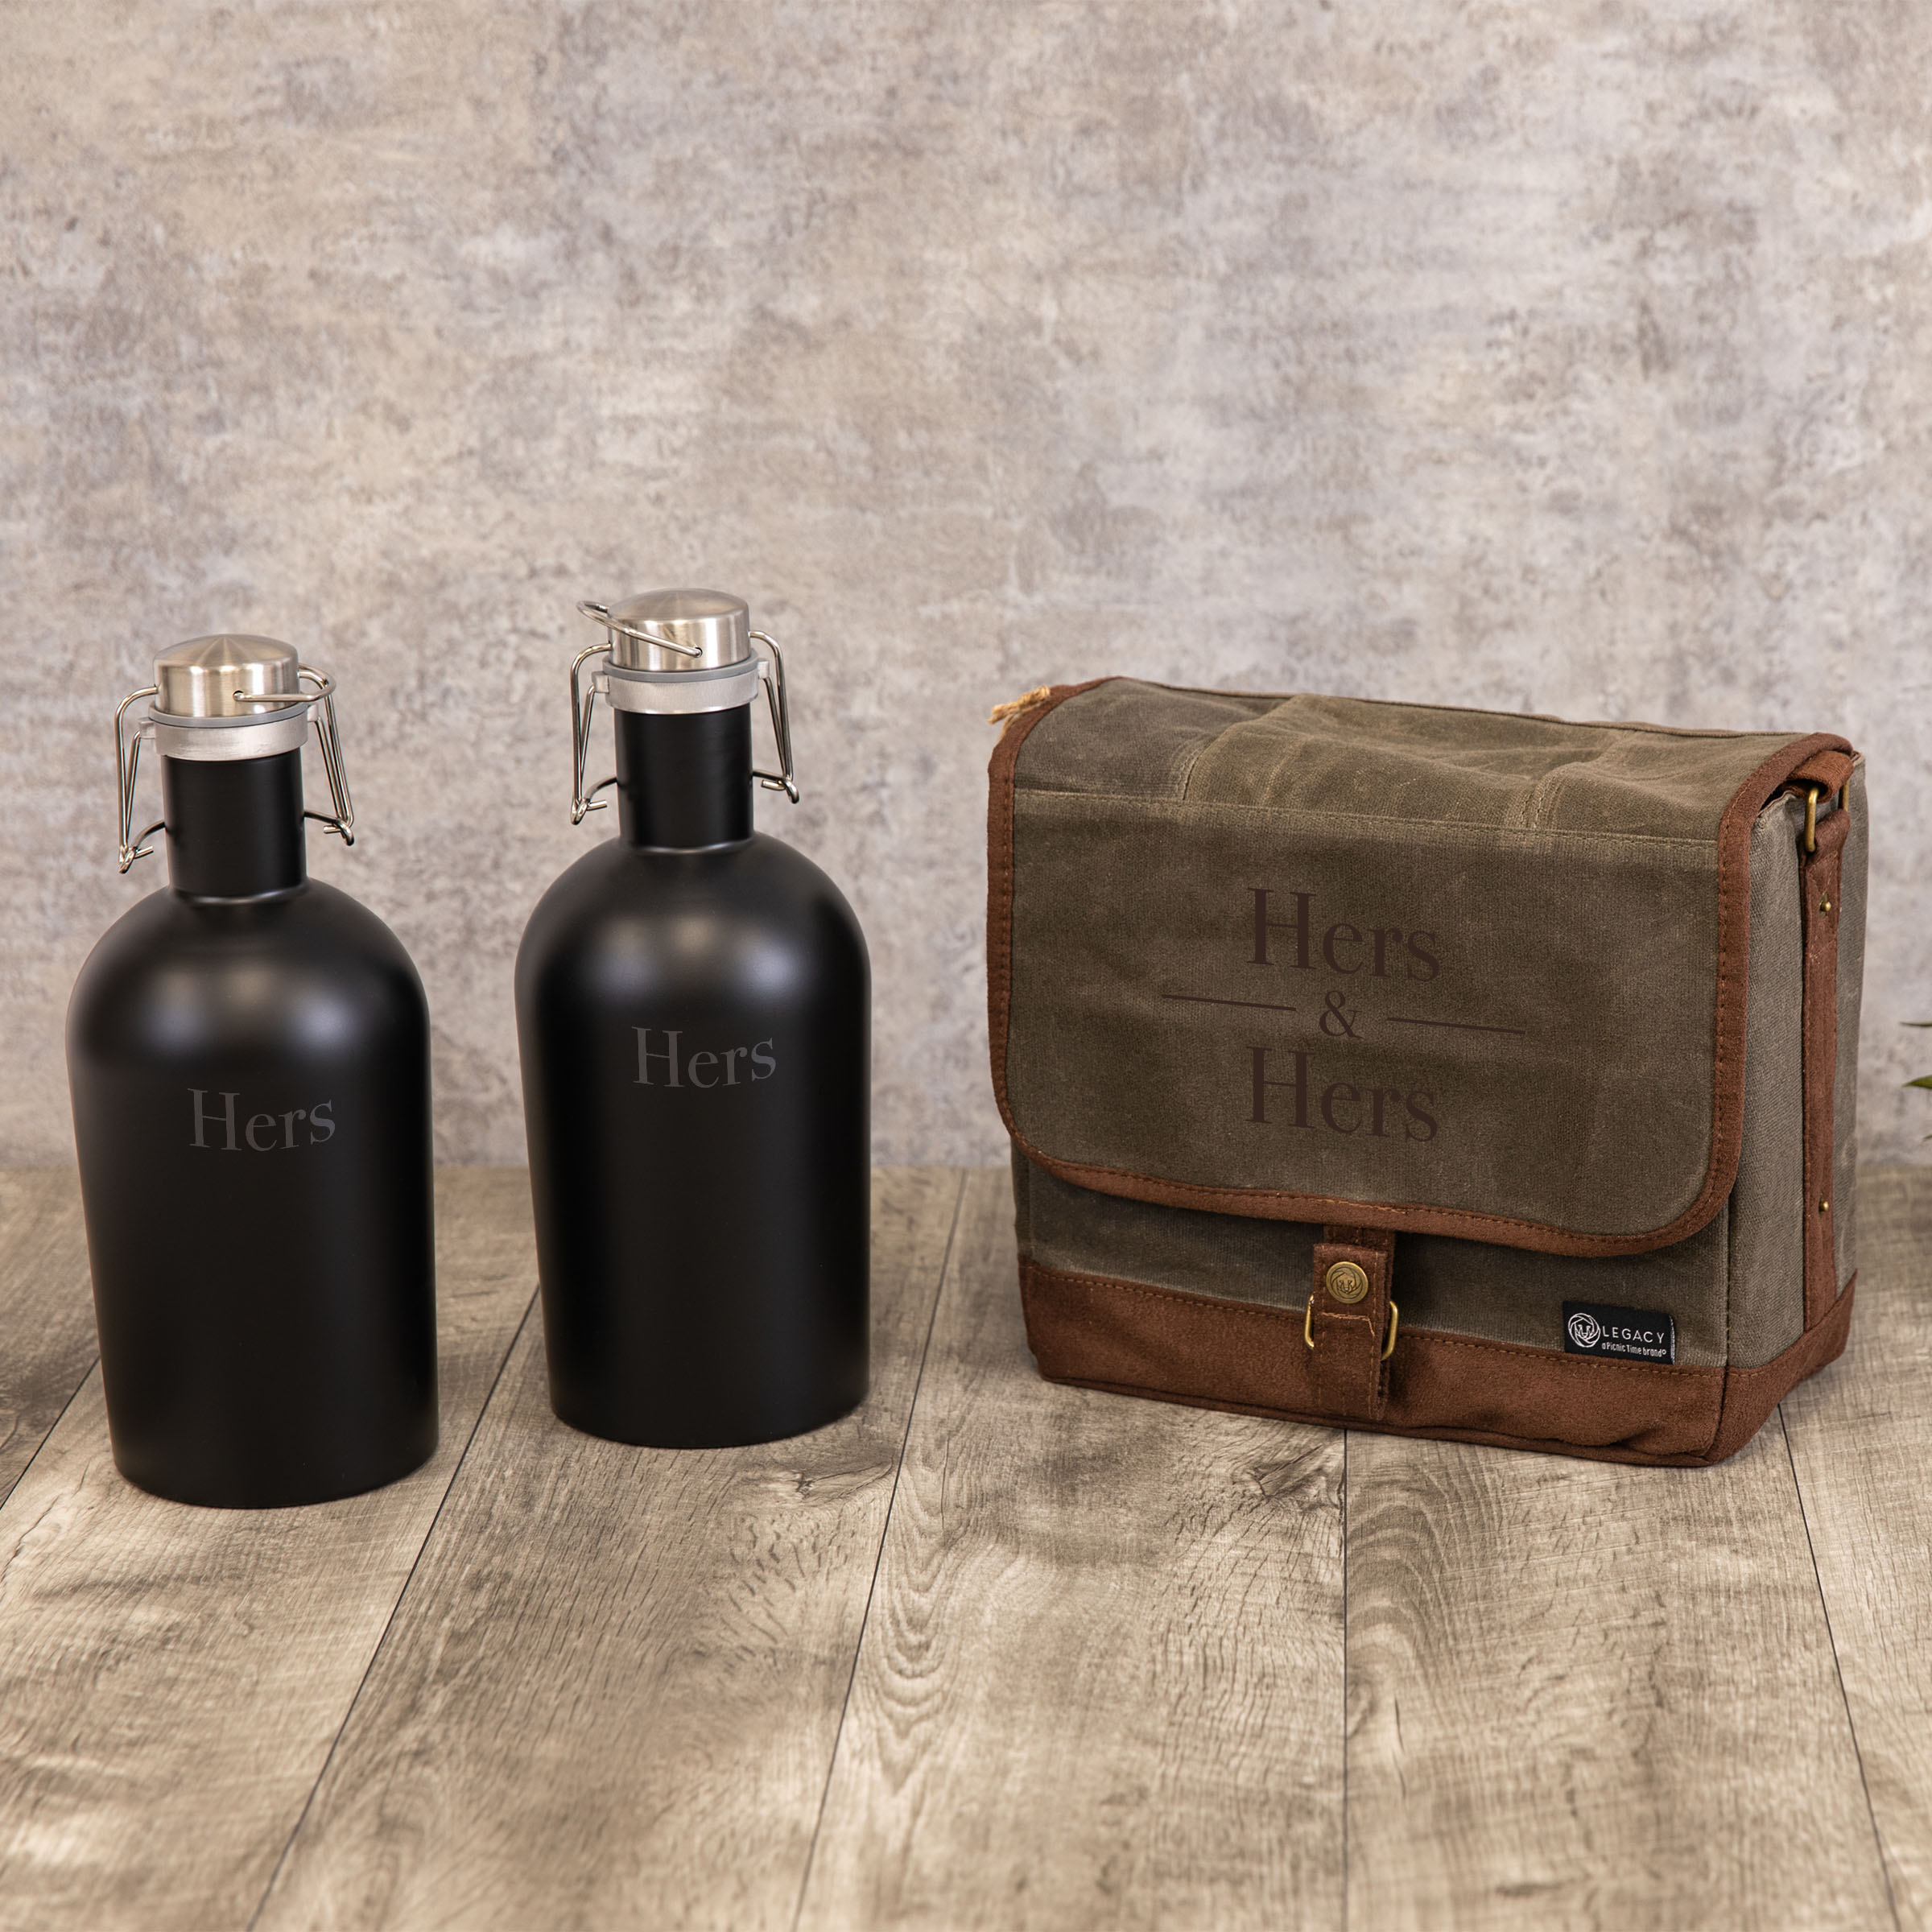 Hers/Hers - Wedding/Anniversary - Double Growler Tote with Growlers Gift Set